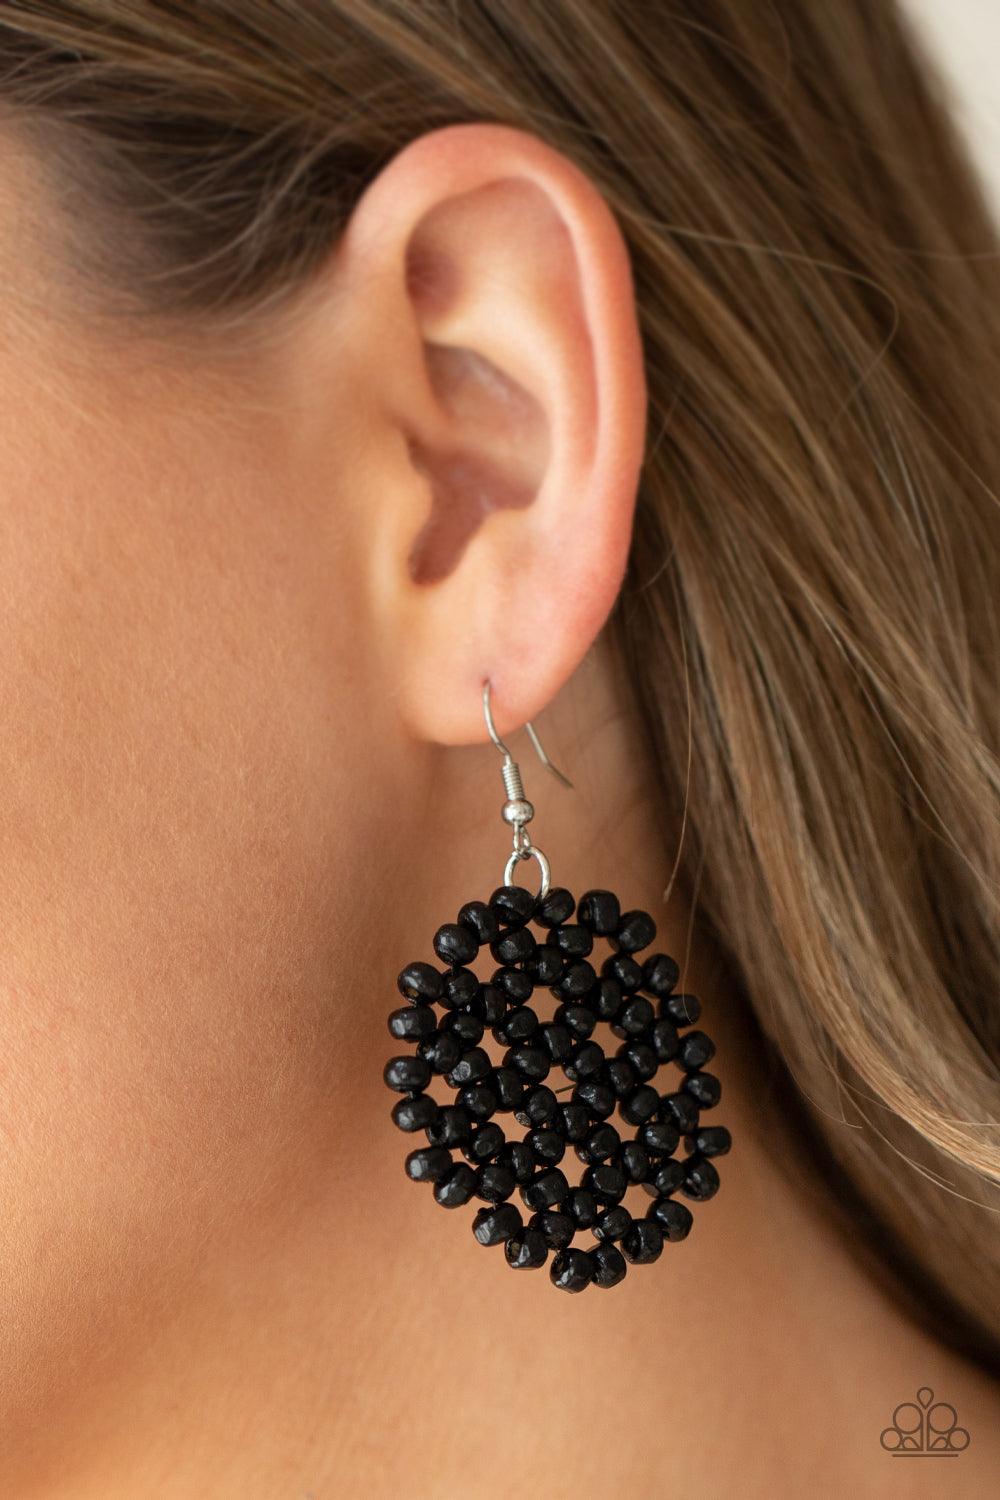 Paparazzi Accessories Summer Escapade - Black Clusters of dainty black wooden beads are threaded along invisible wire, creating a vivacious floral pattern frame for a summery flair. Earring attaches to a standard fishhook fitting. Sold as one pair of earr